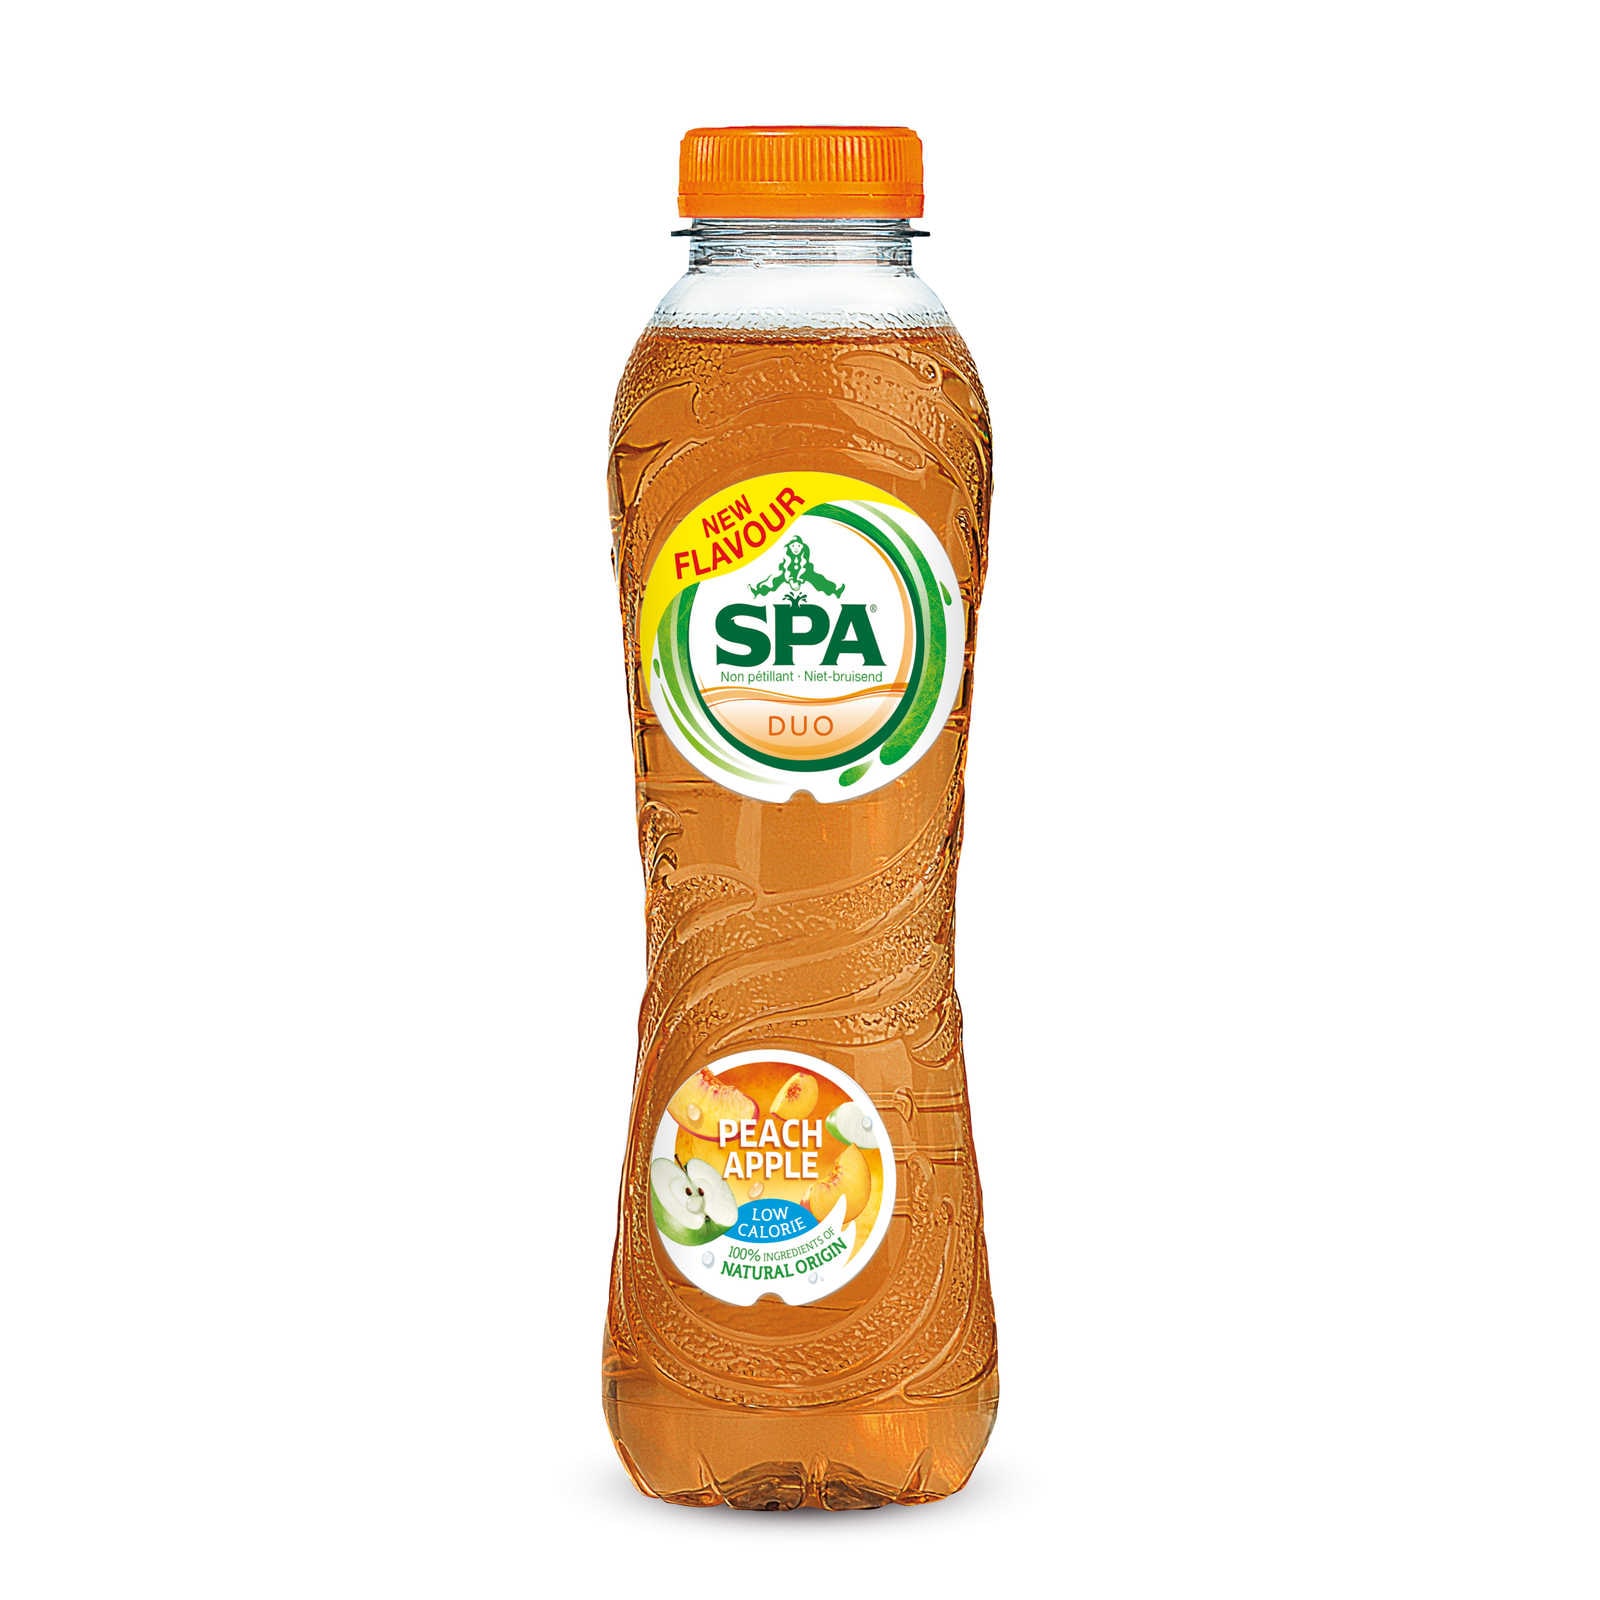 Spa-Duo